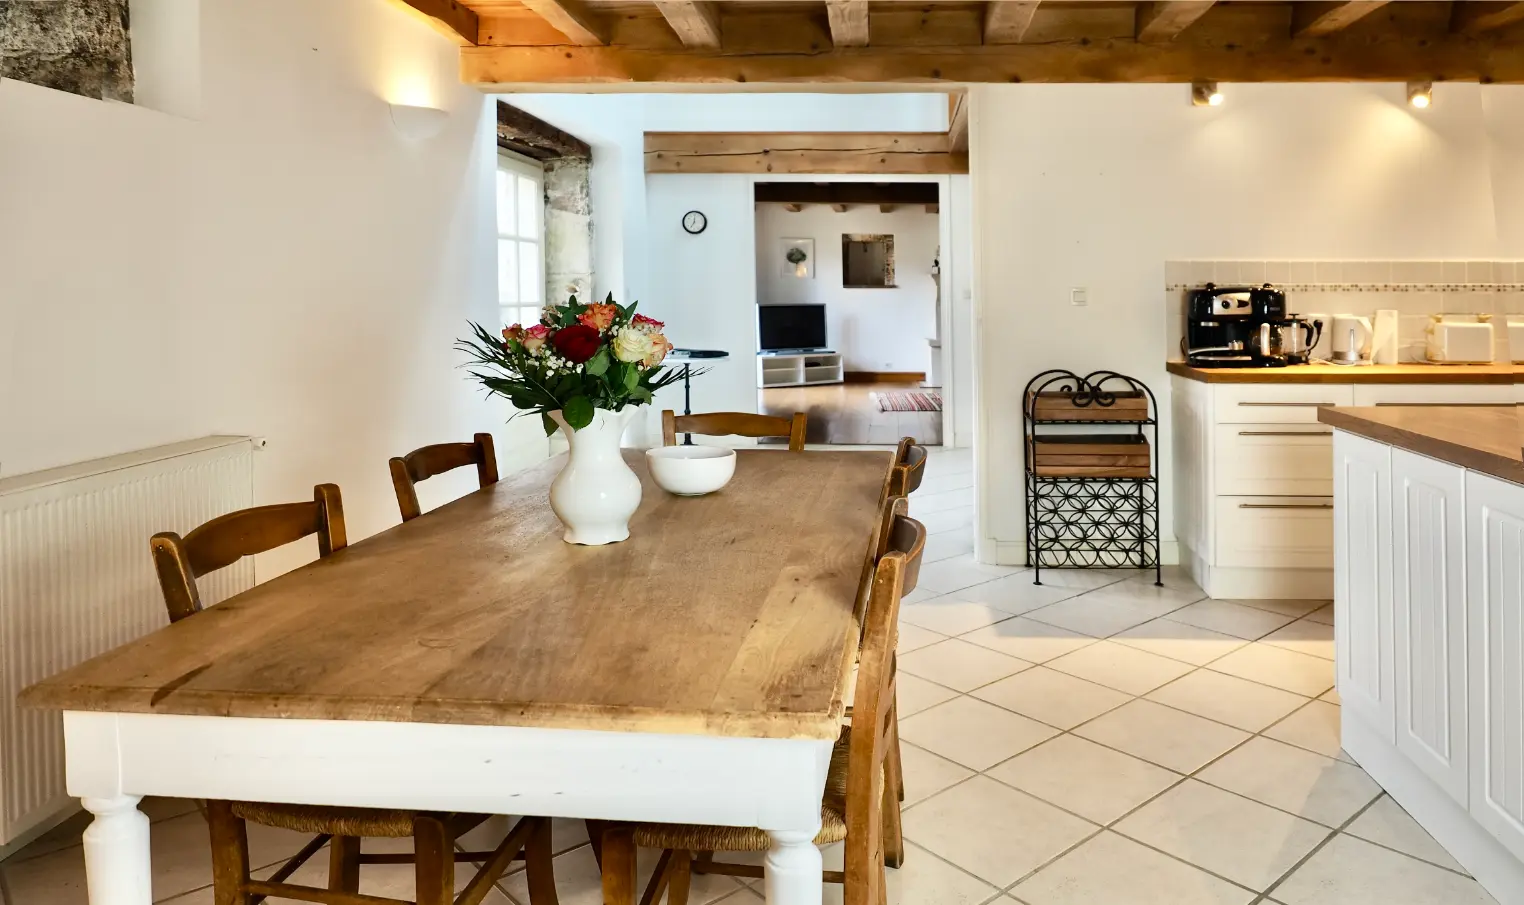 Coriandre House, cottage in Charente.